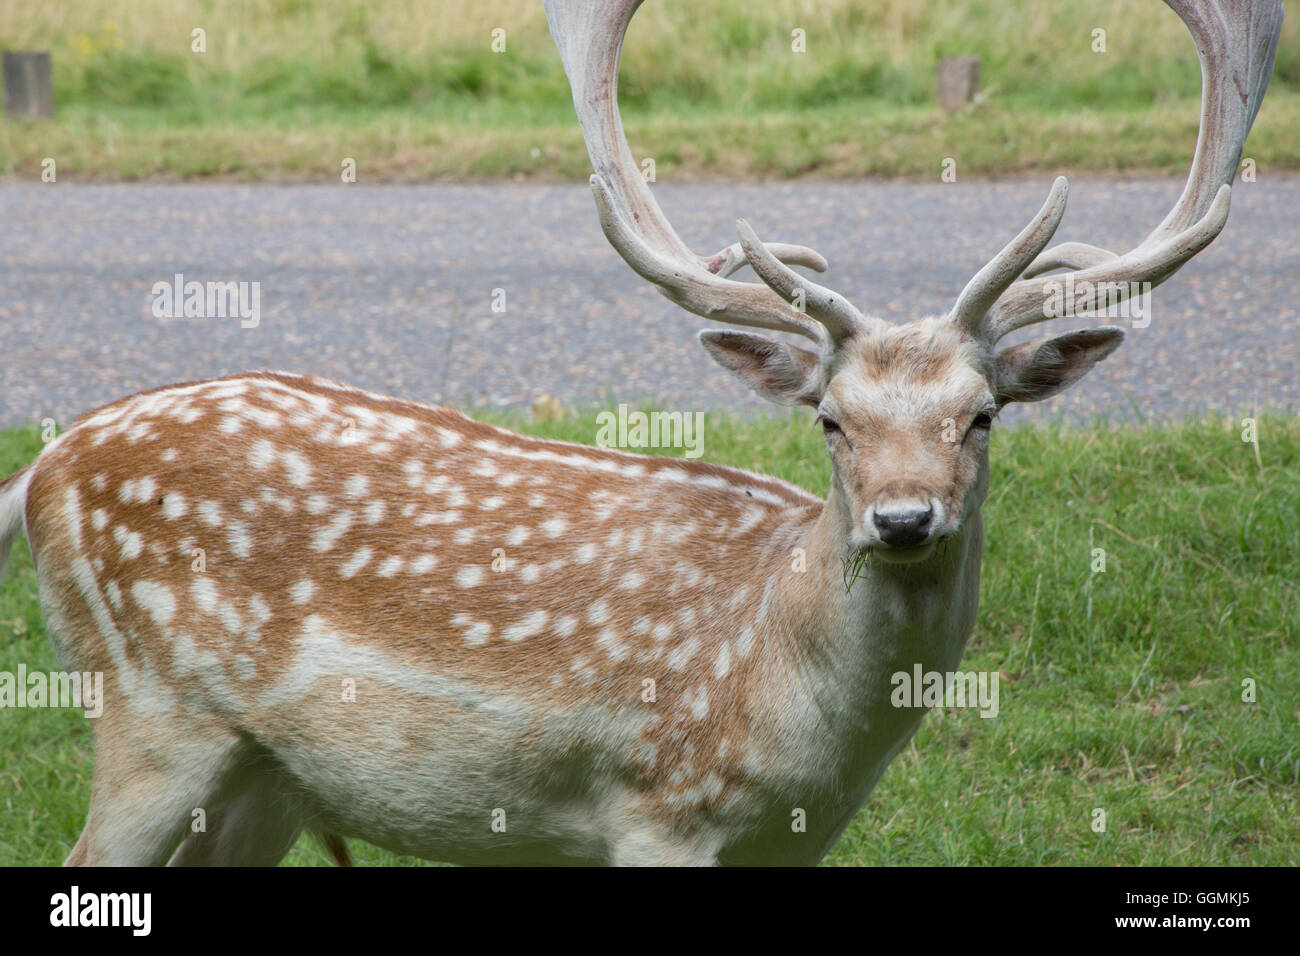 A view of deer in Richmond Park in London Stock Photo